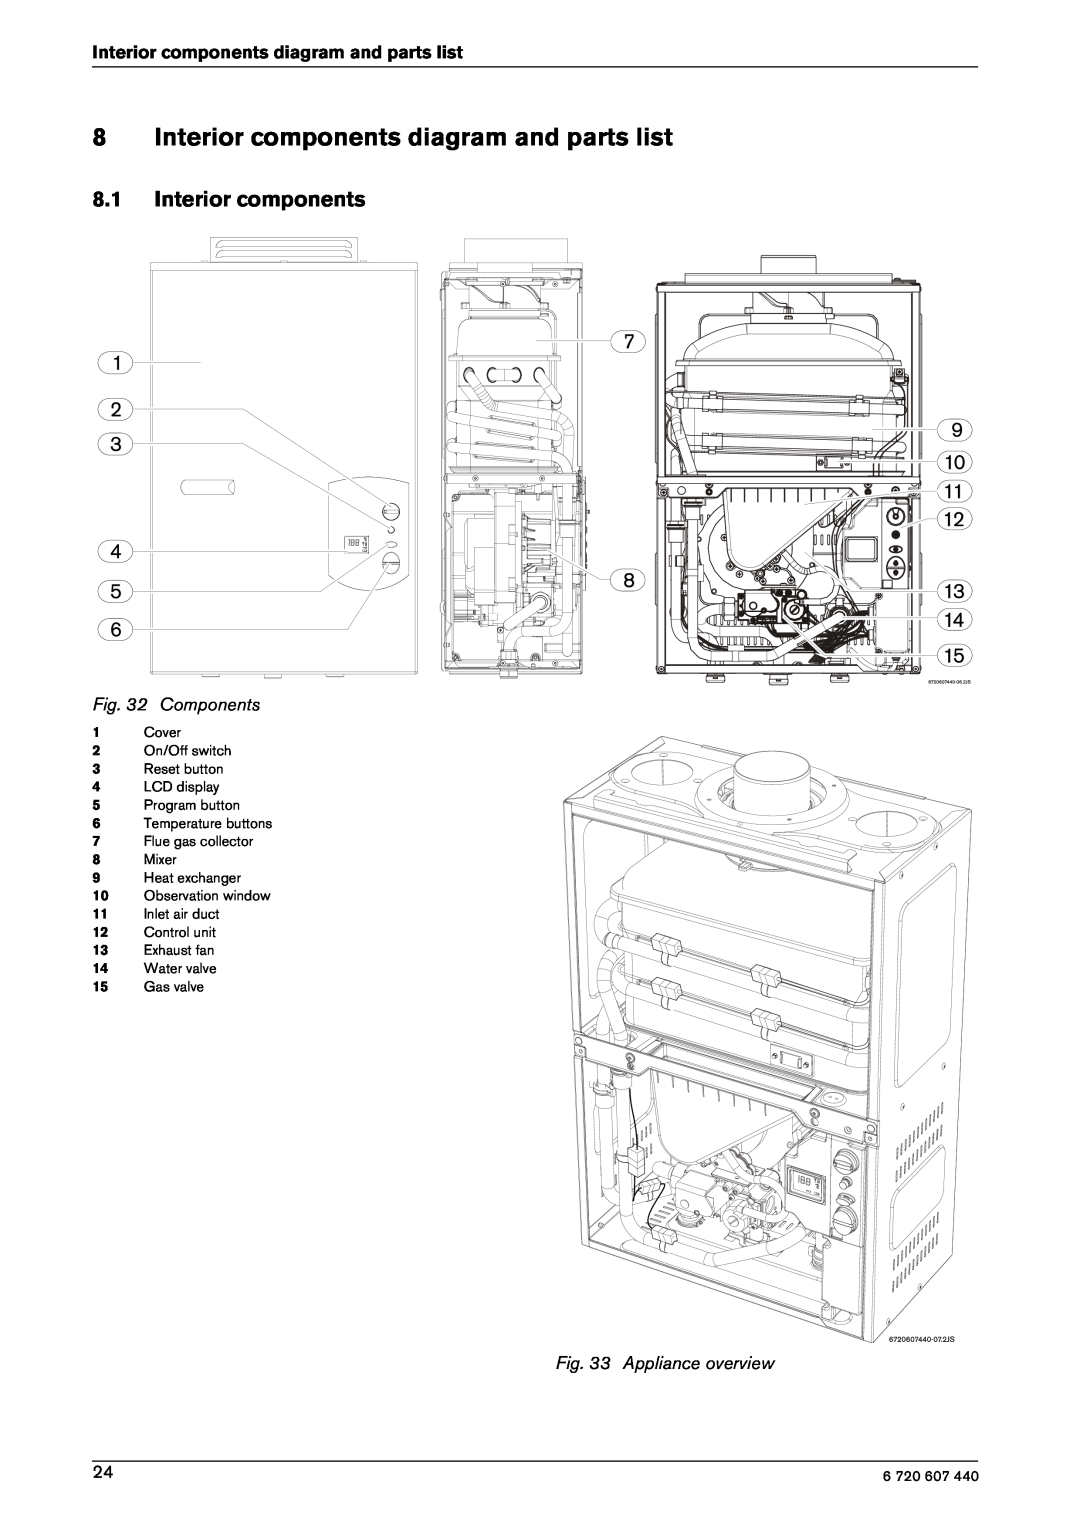 Bosch Appliances 250 SXO NG Interior components diagram and parts list, Appliance overview, Components, Cover, LCD display 